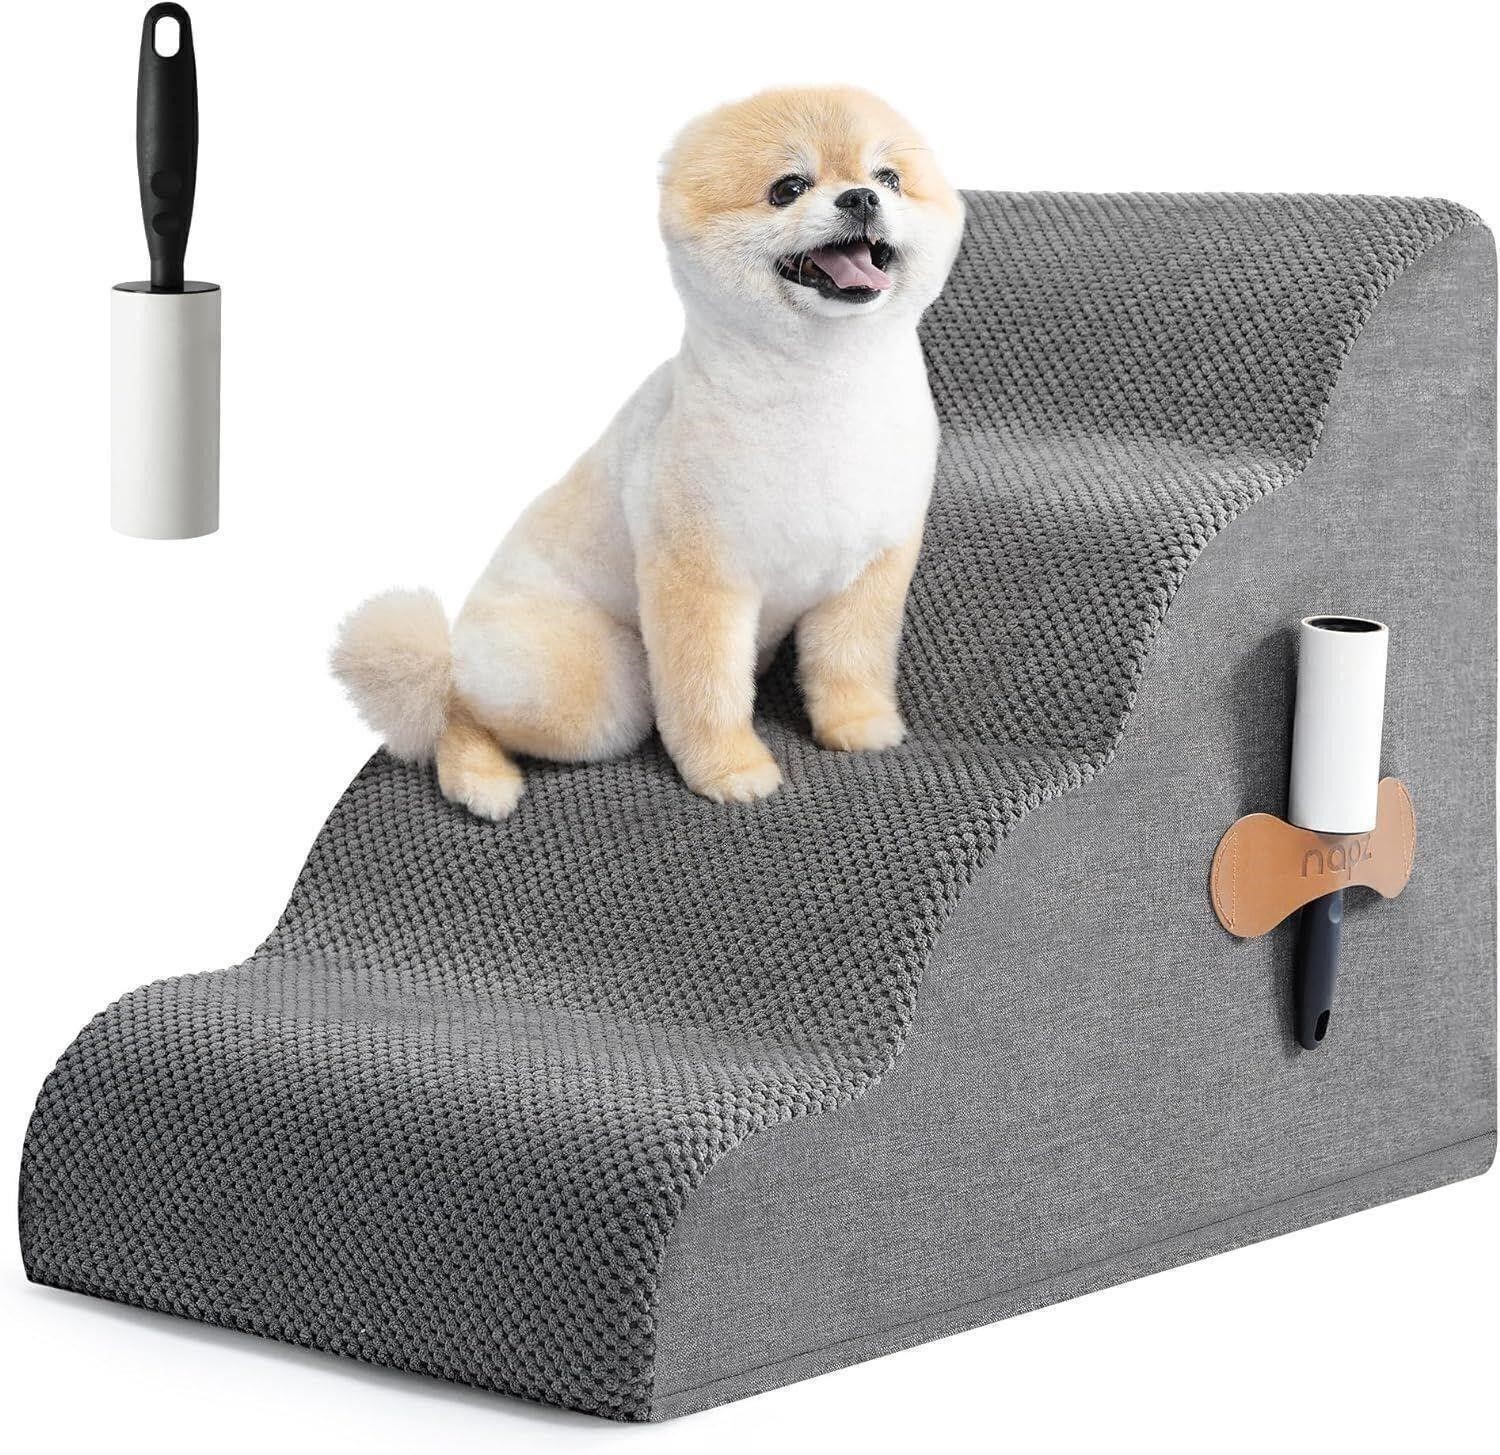 Napz 4 Tier Dog Stairs for Small Dogs and Cats